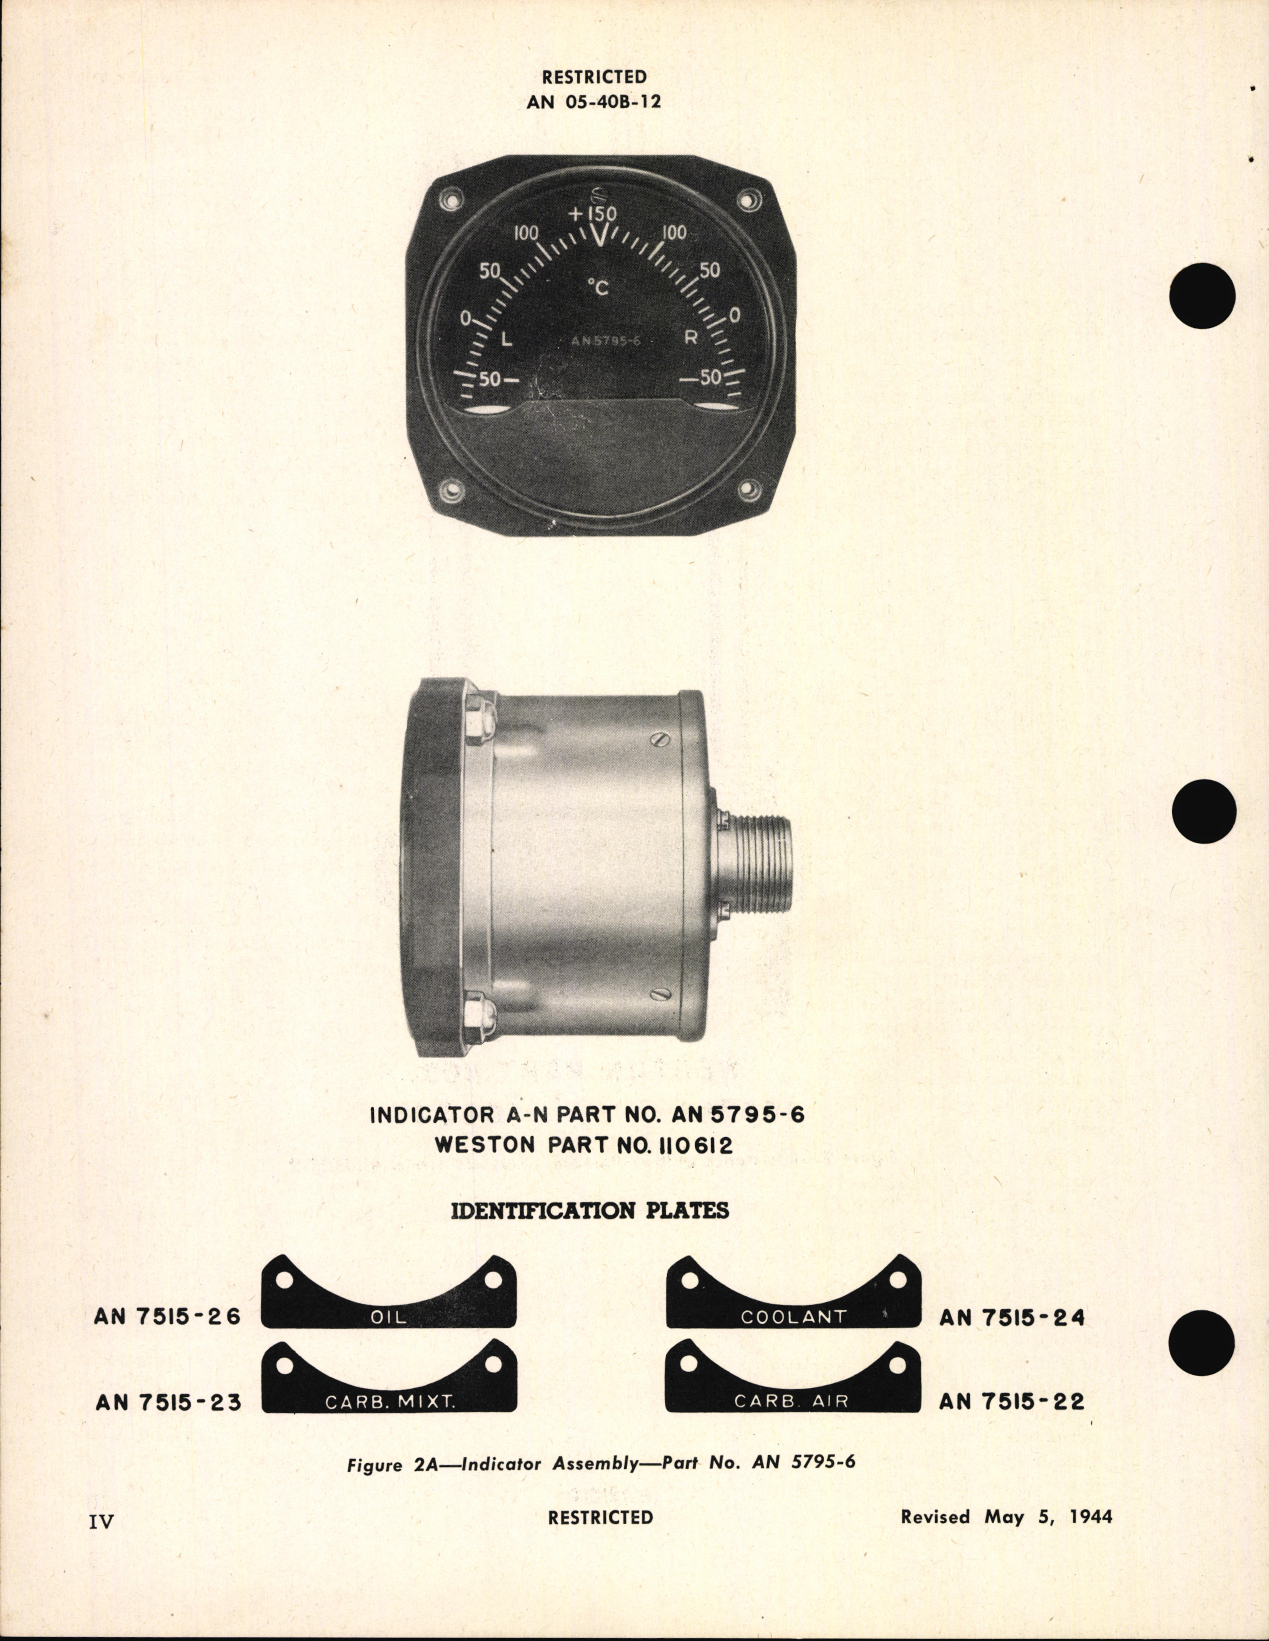 Sample page 6 from AirCorps Library document: Handbook of Instructions with Parts Catalog for Thermometer Indicators